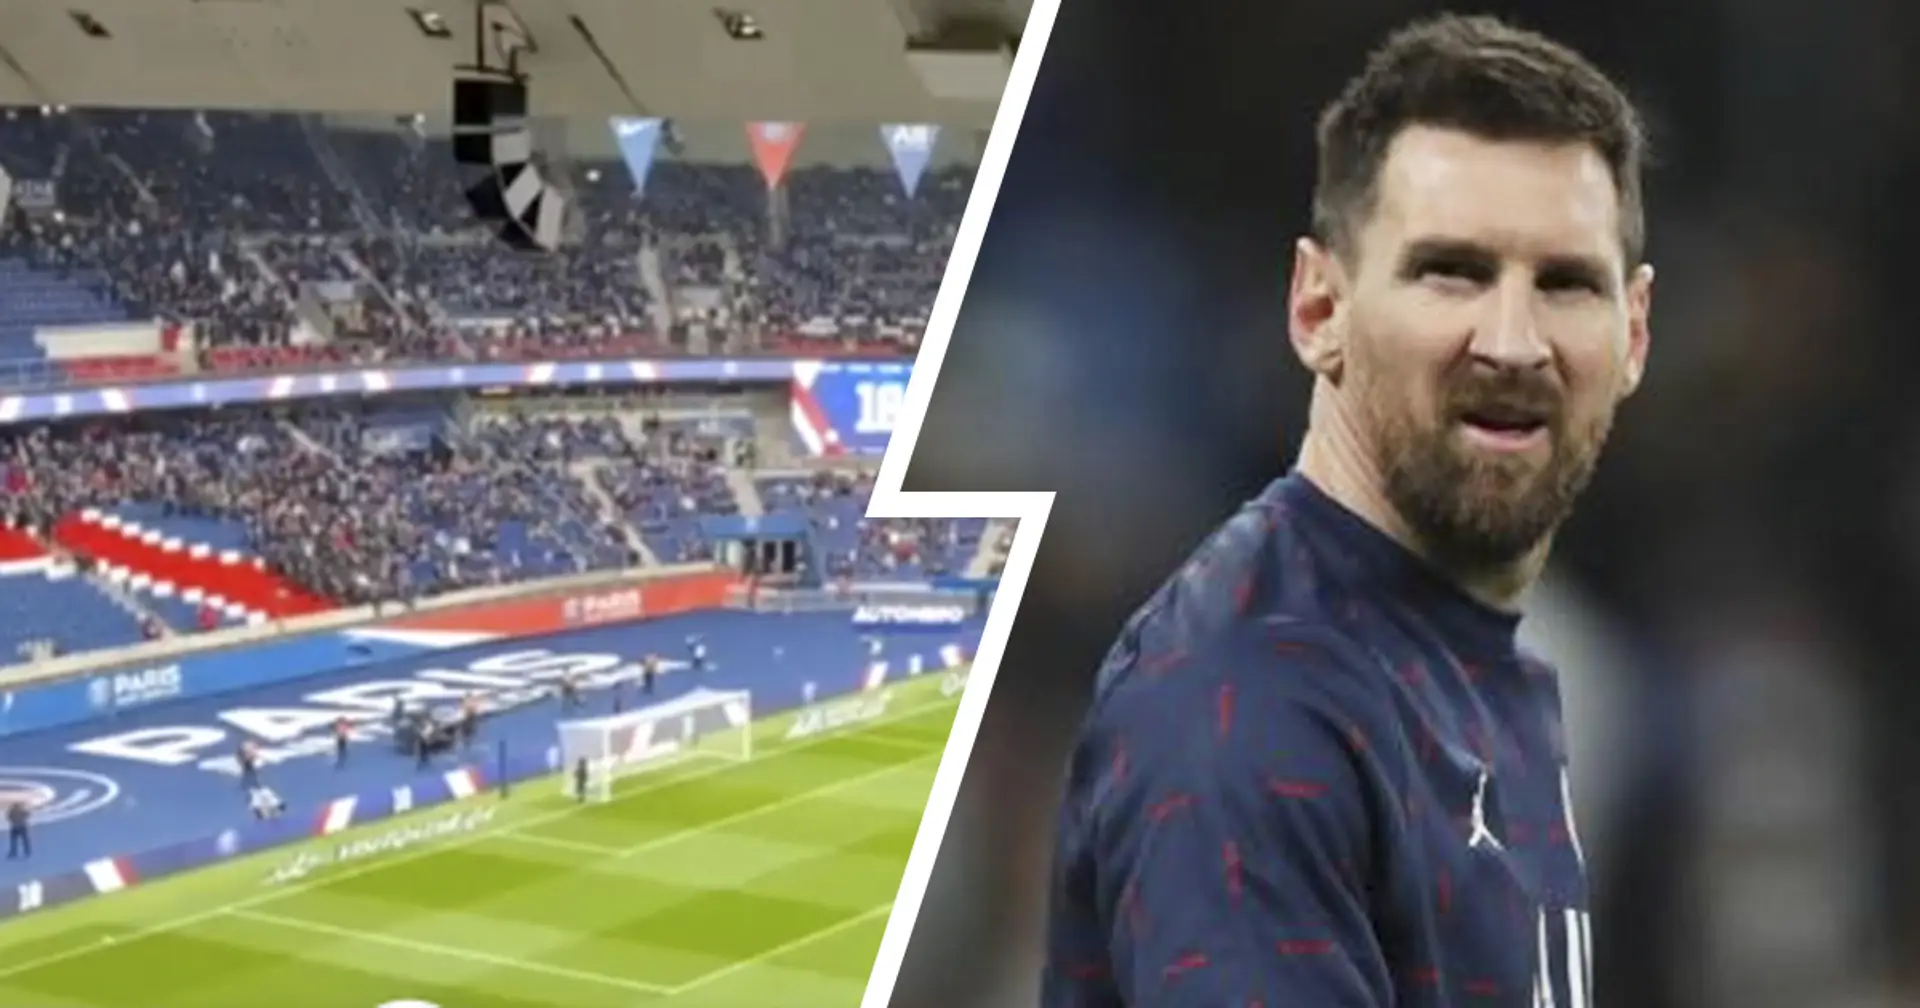 Messi booed and whistled by PSG fans ahead of Ligue 1 match, Mbappe applauded